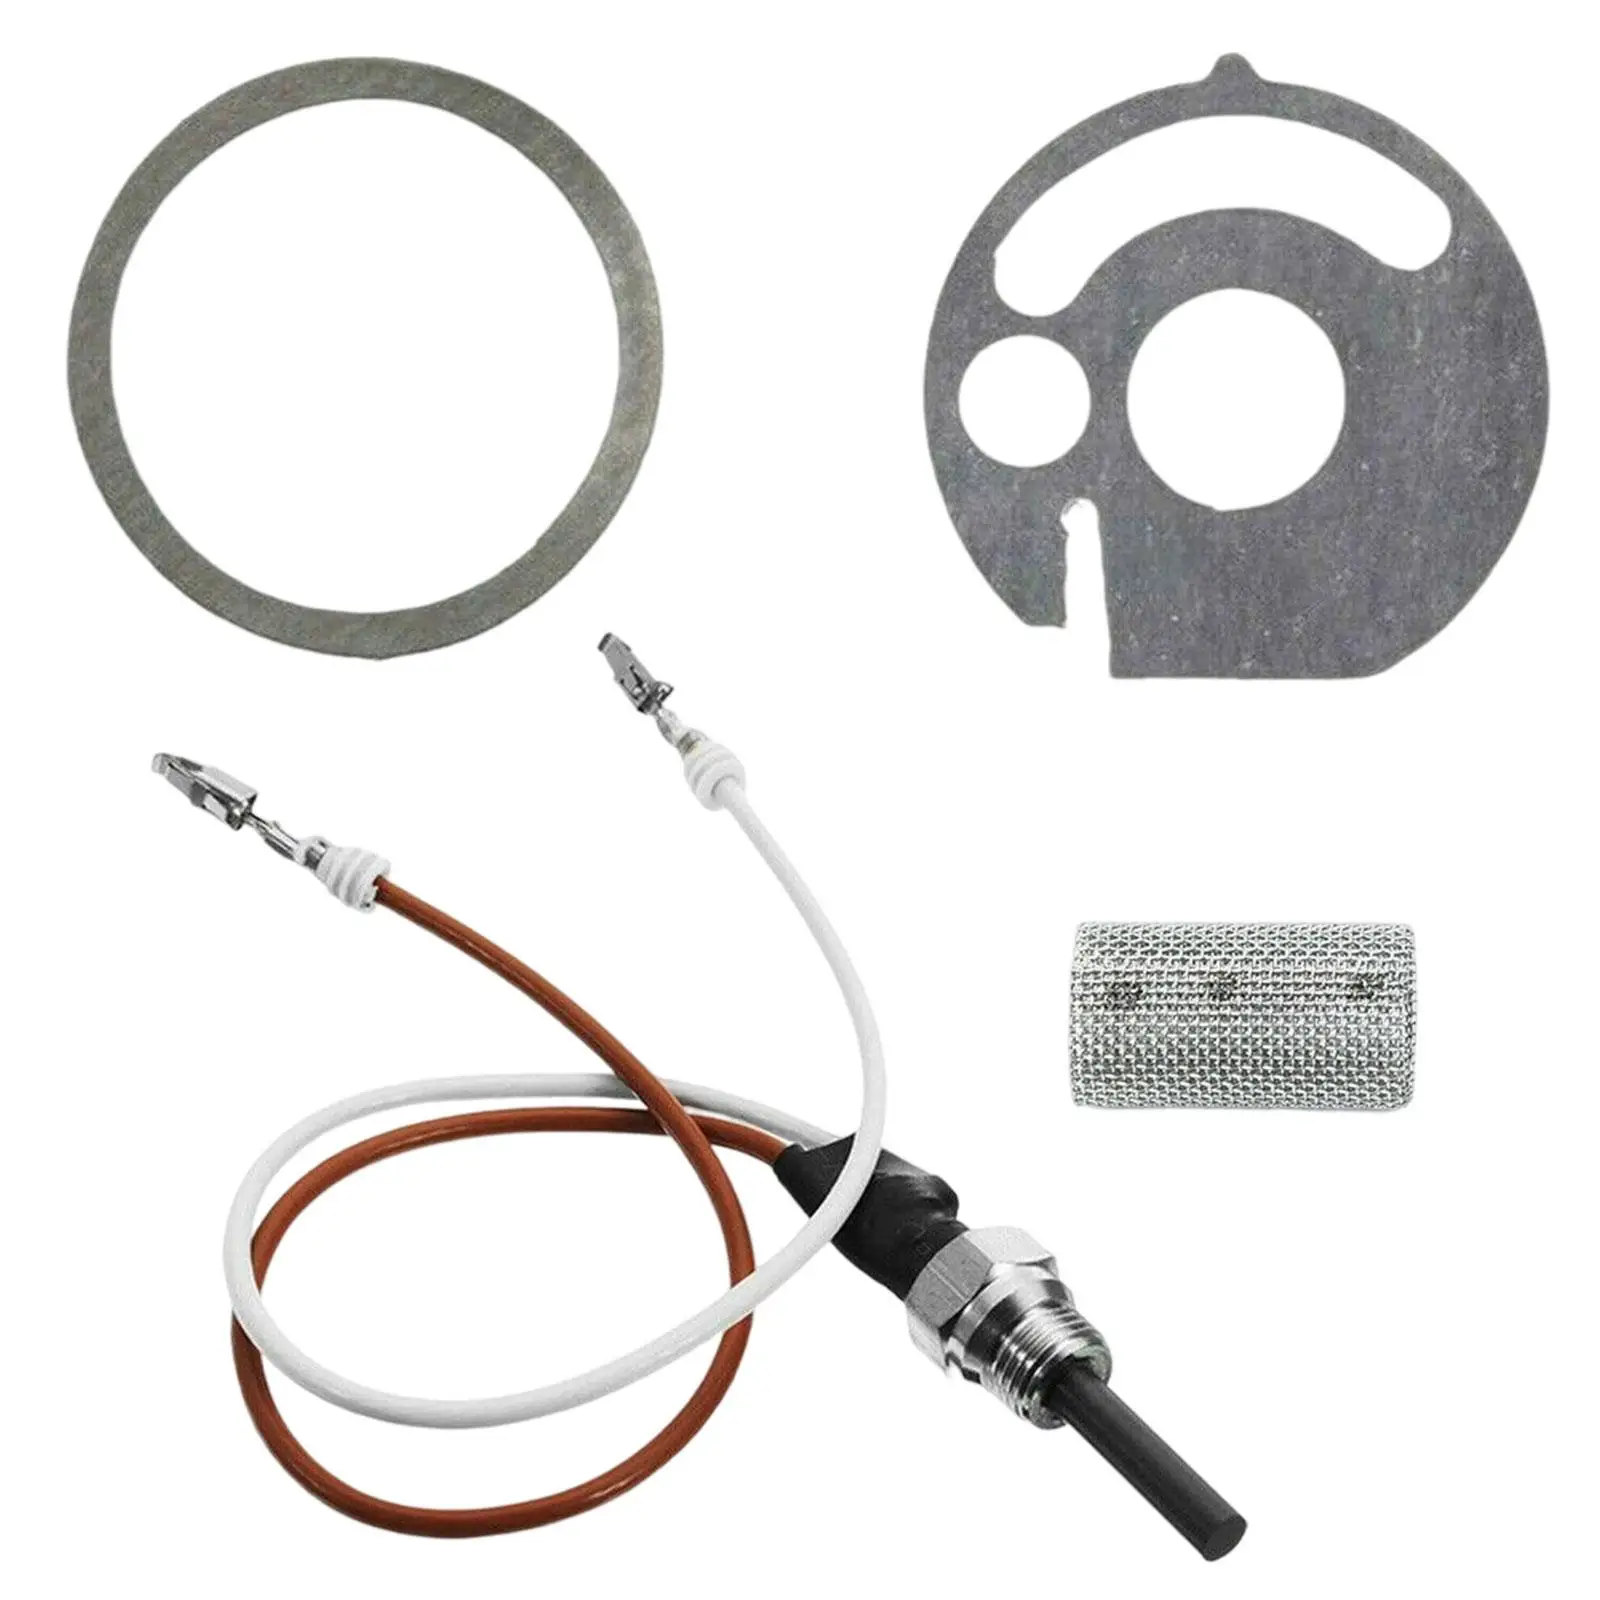 Parking Heater Glow Plug Kit for Hydronic D4WS 5WZ Parts